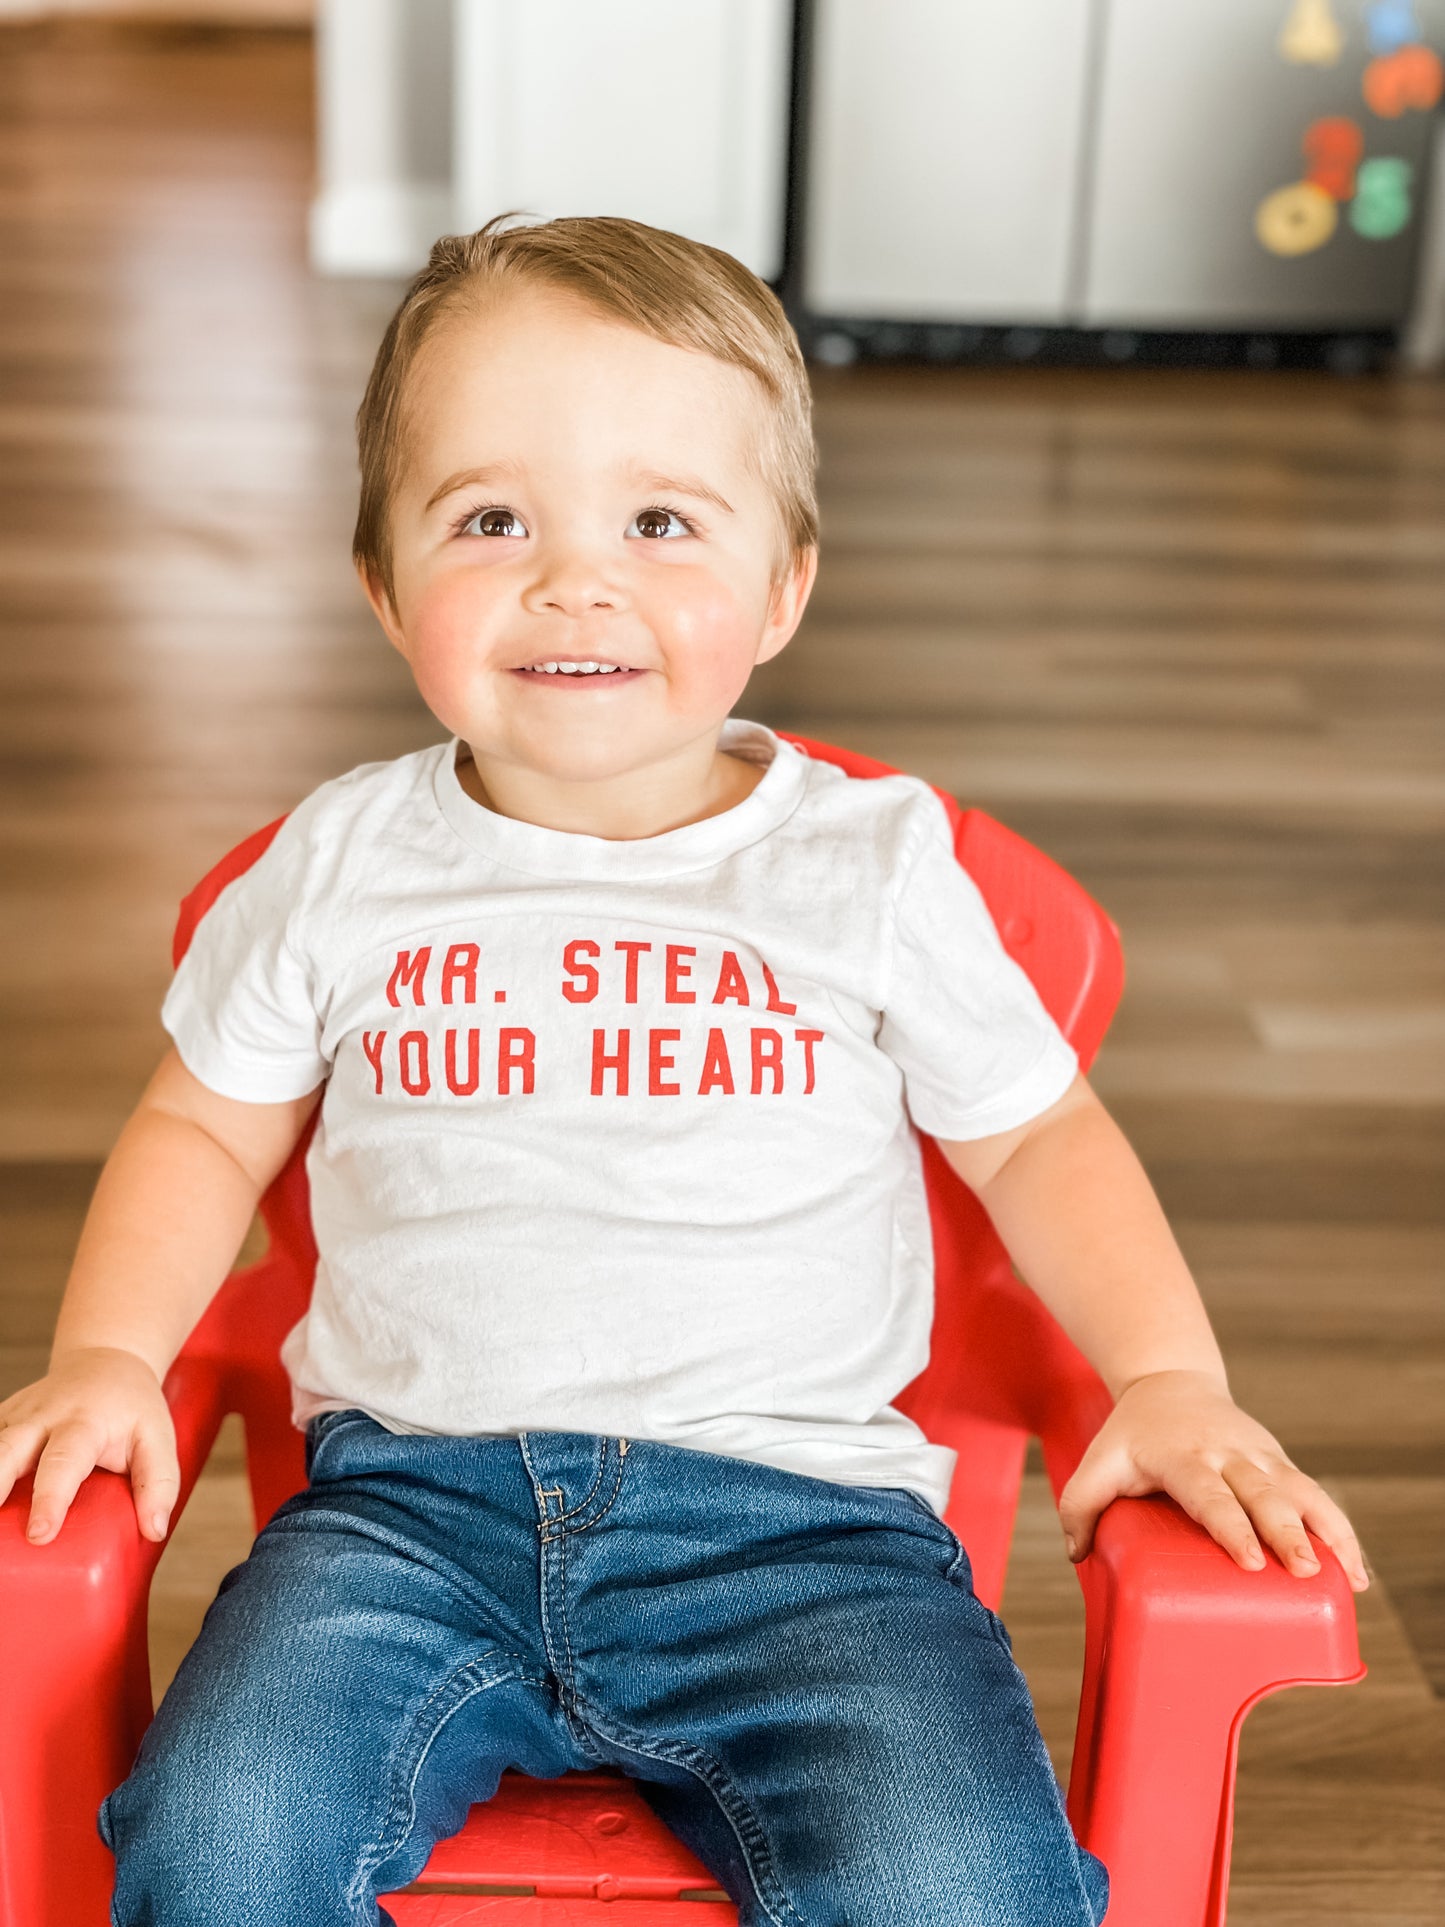 Mr. Steal Your Heart (Red) - Kids Tee (White)